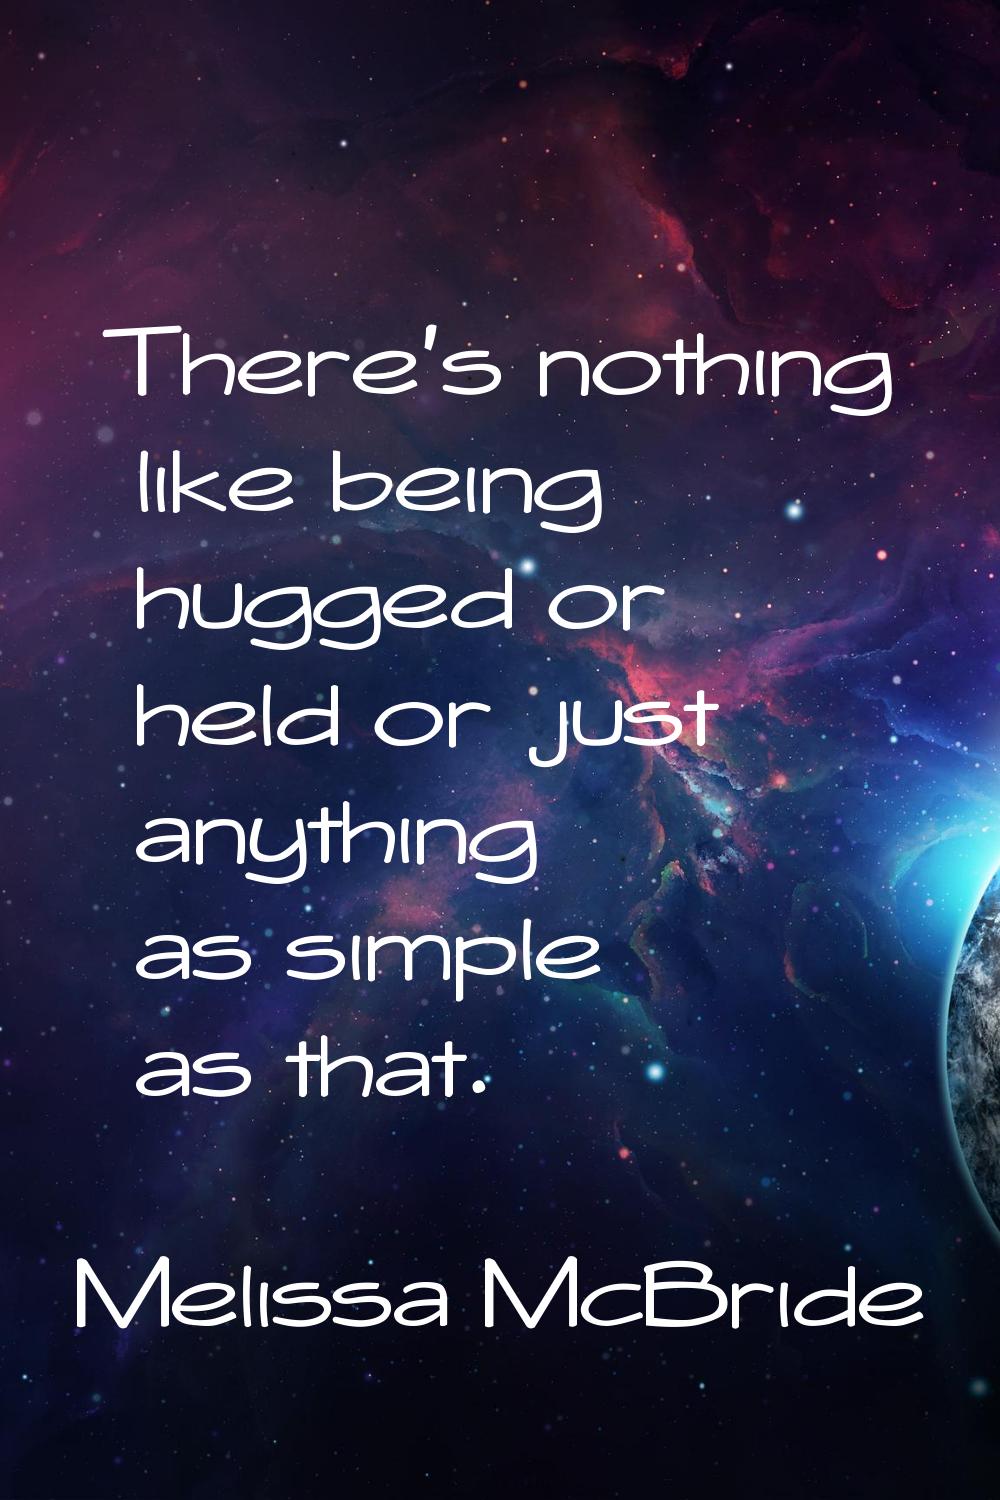 There's nothing like being hugged or held or just anything as simple as that.